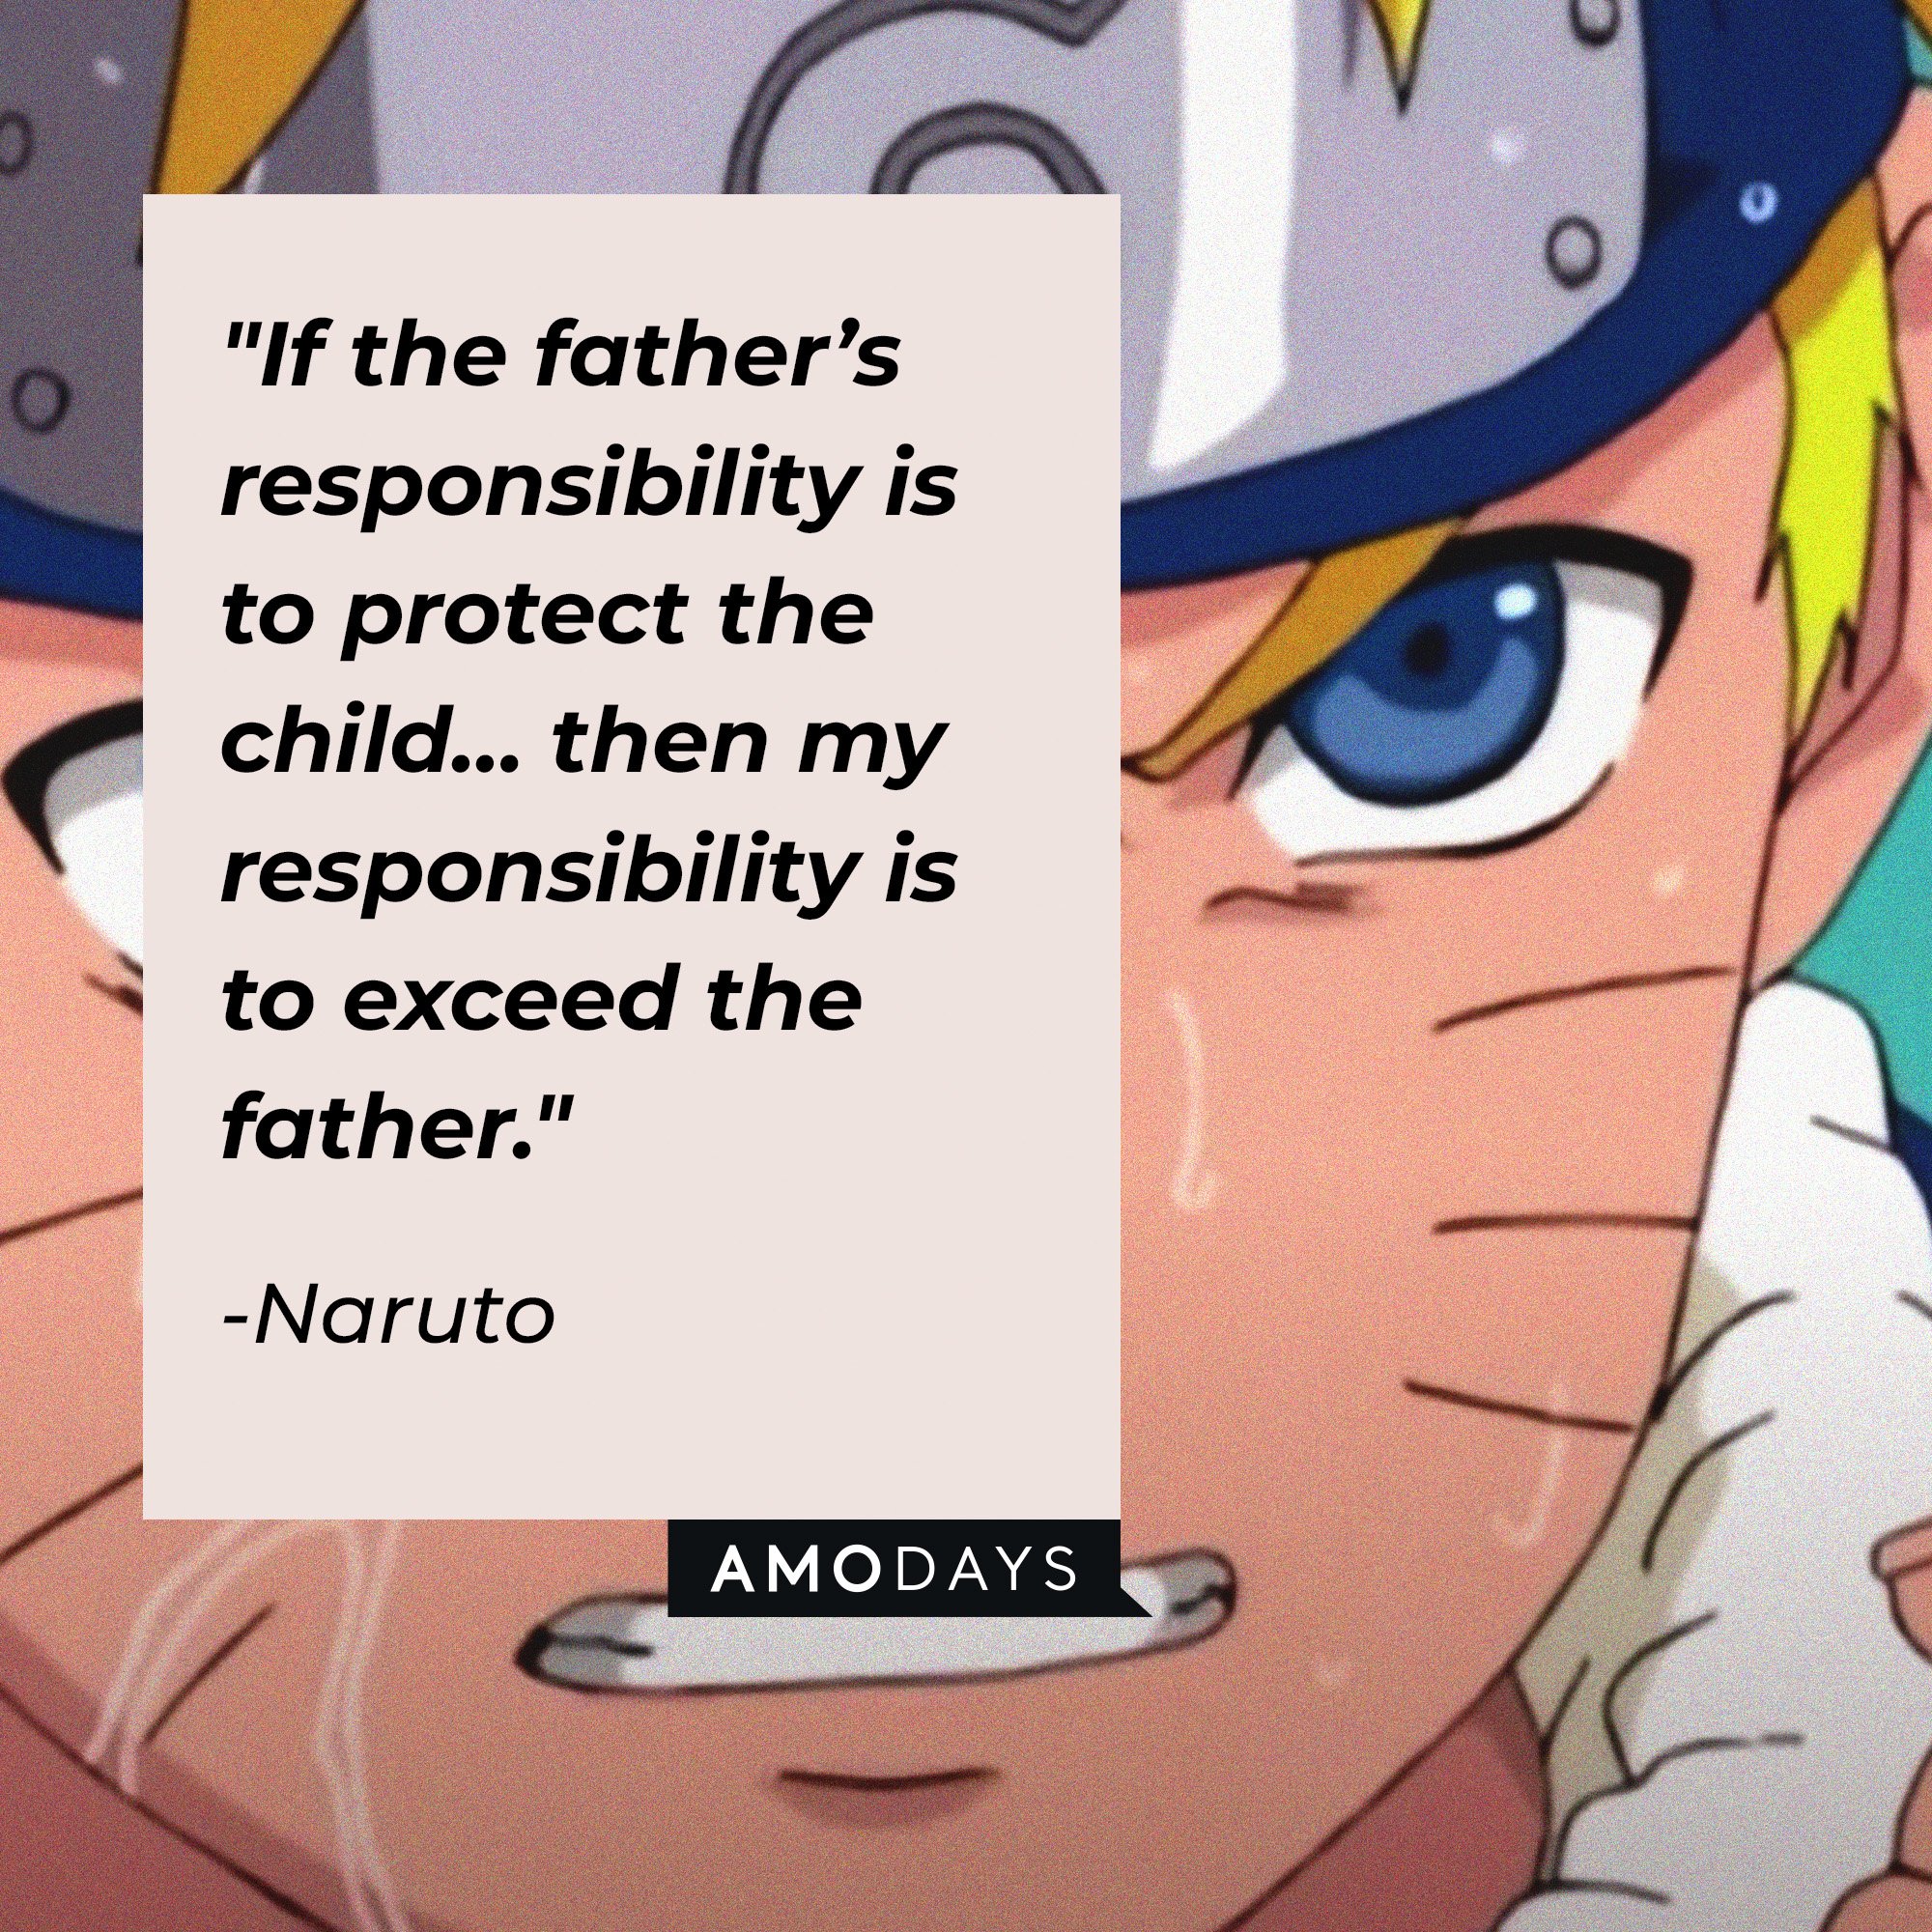 Naruto's quote: "If the father’s responsibility is to protect the child… then my responsibility is to exceed the father." | Image: AmoDays